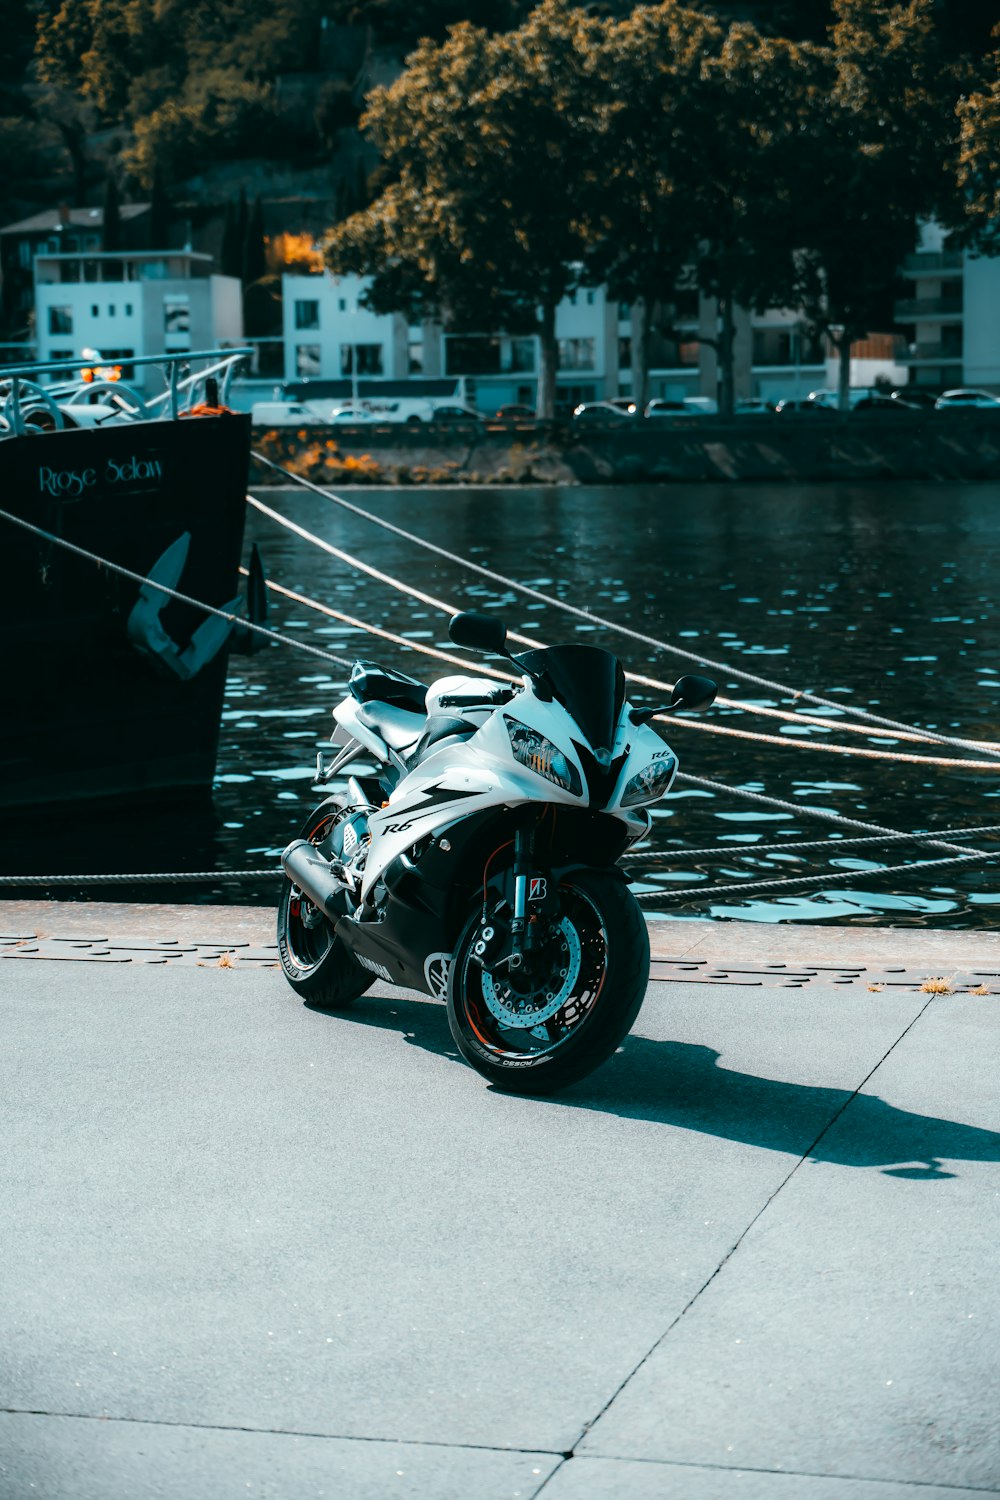 a motorcycle parked next to a body of water